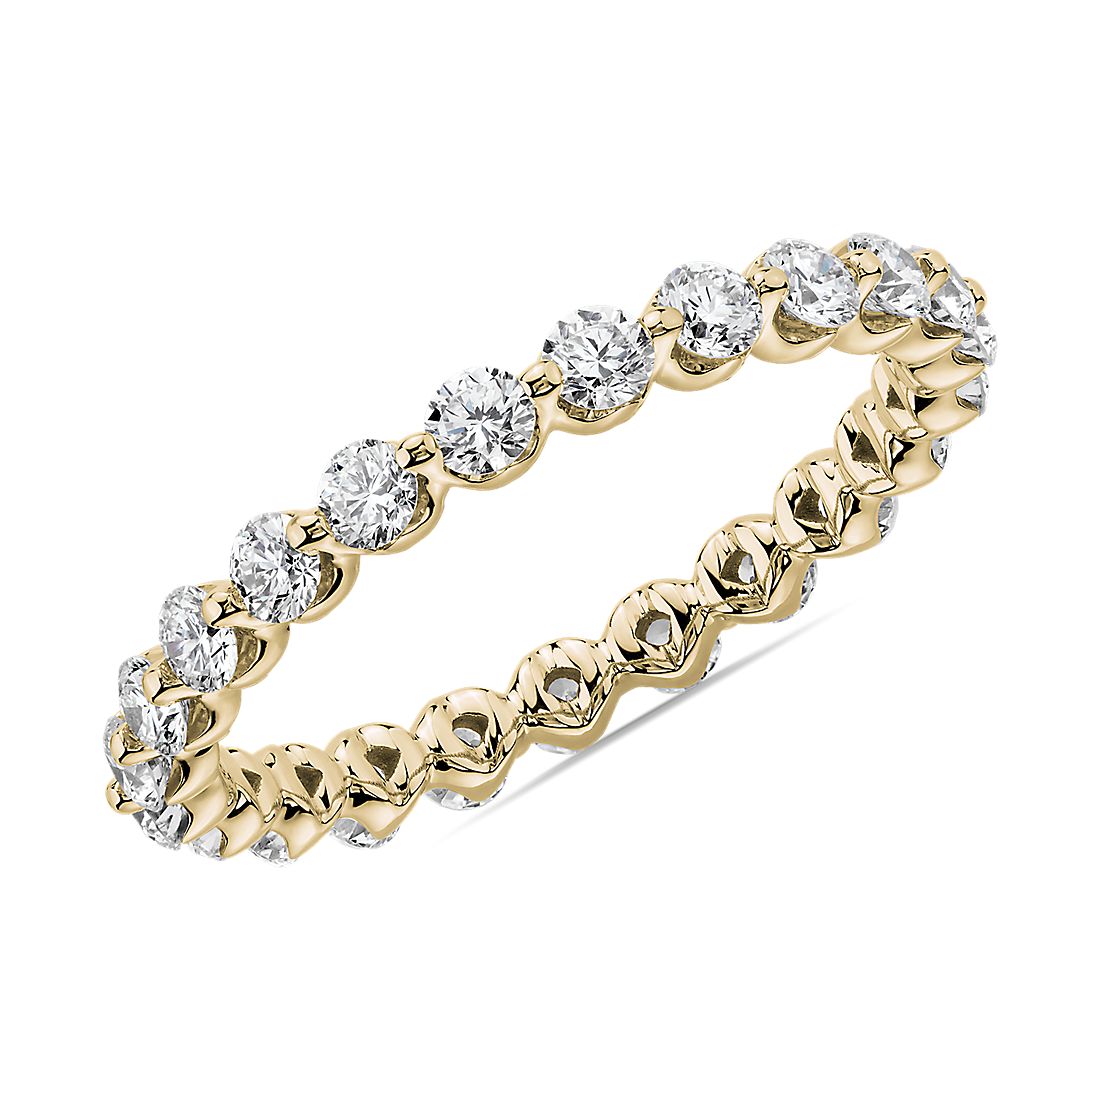 Floating Diamond Eternity Band in 14k Yellow Gold (1 ct. tw.)